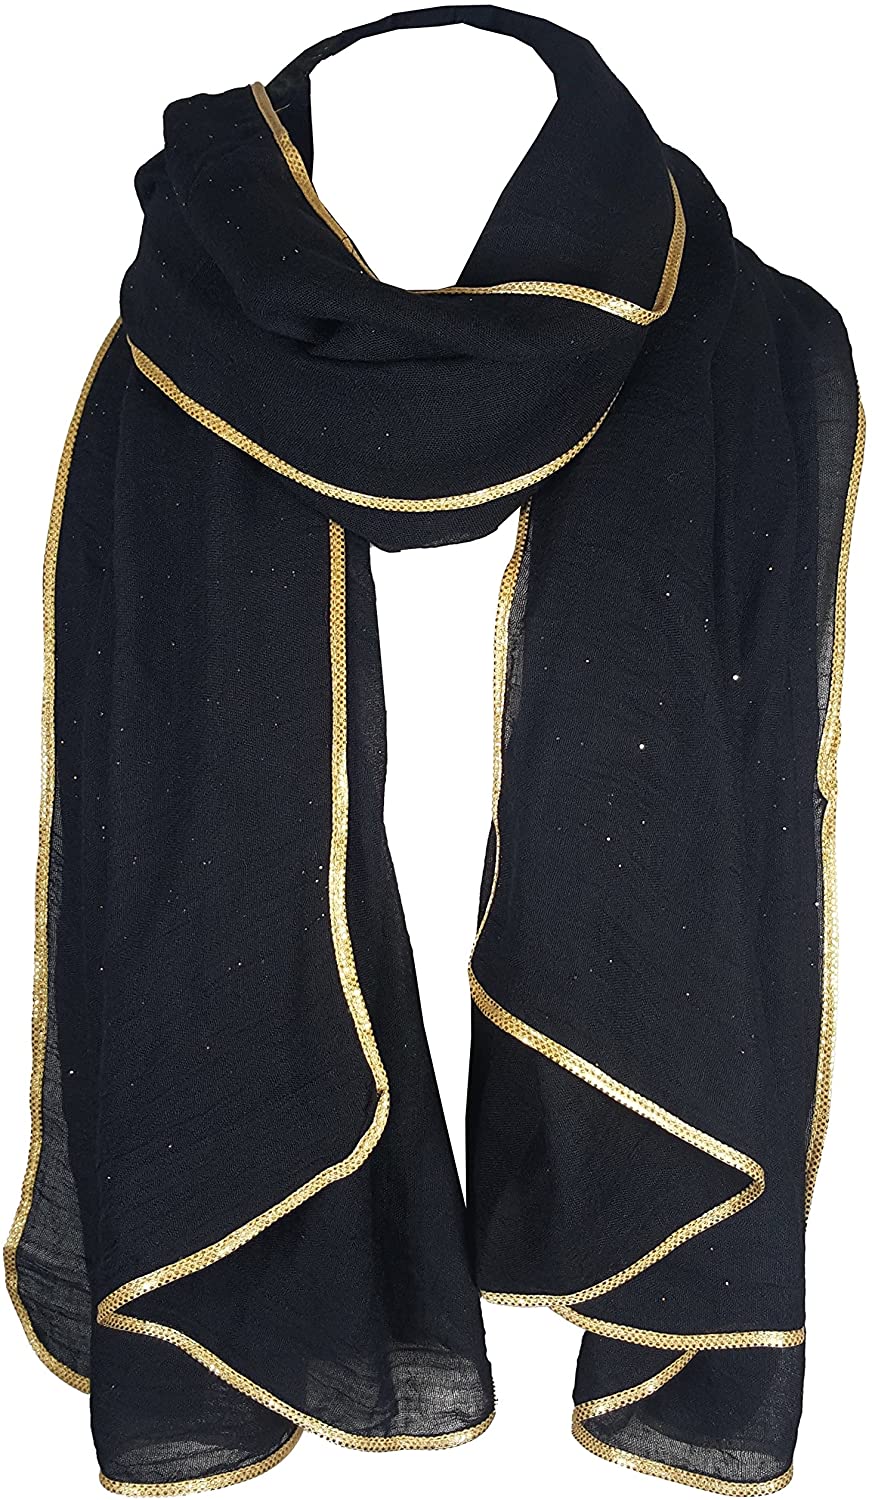 SEASONAL SPECIAL New Ladies Celebrity Style Glitter Sparkle Stardust with Gold Piping Border Scarf Scarves Maxi Wrap Wedding Party Gift - World of Scarfs